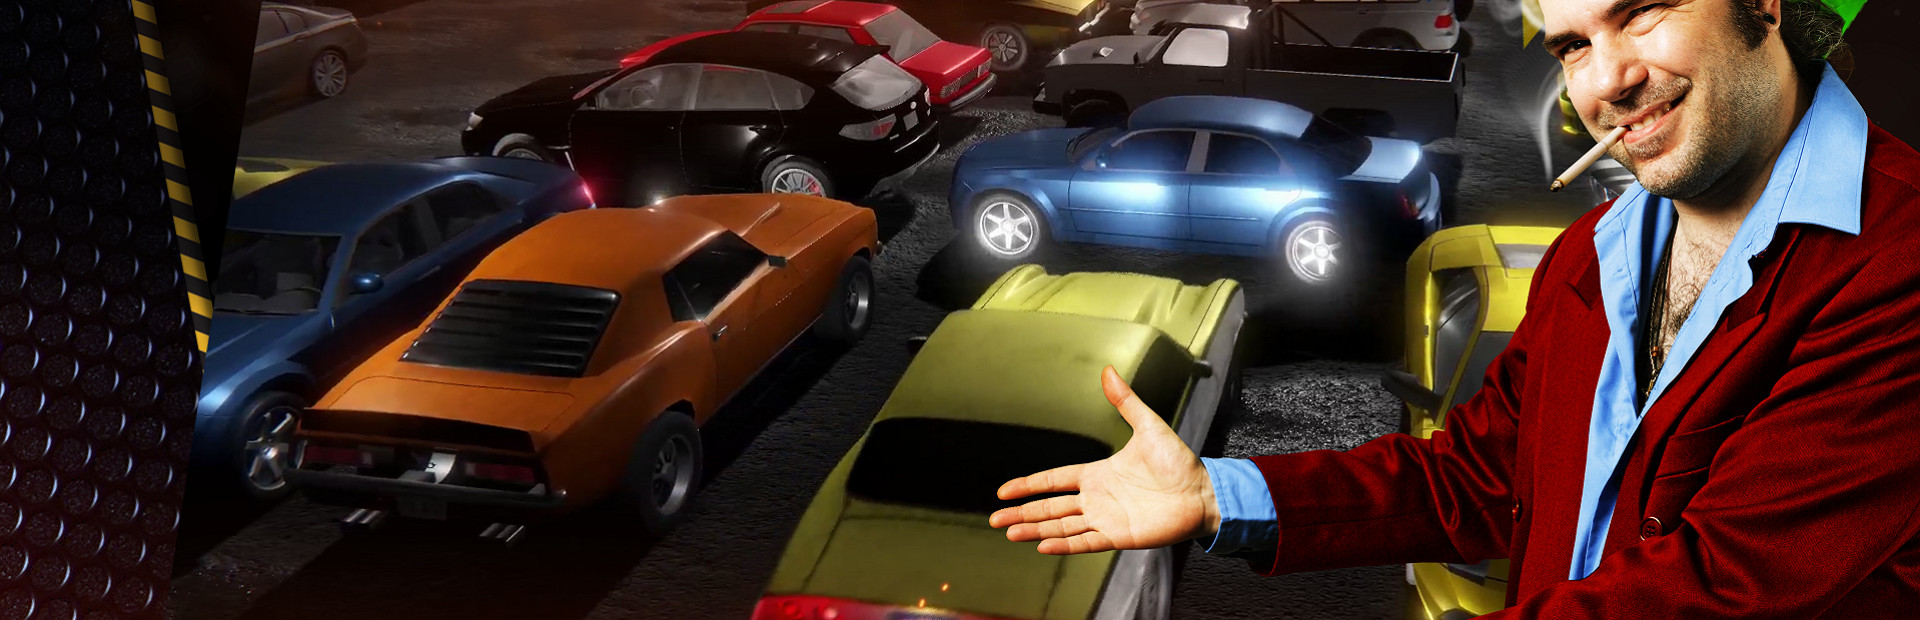 Car Trader Simulator - Welcome to the Business cover image